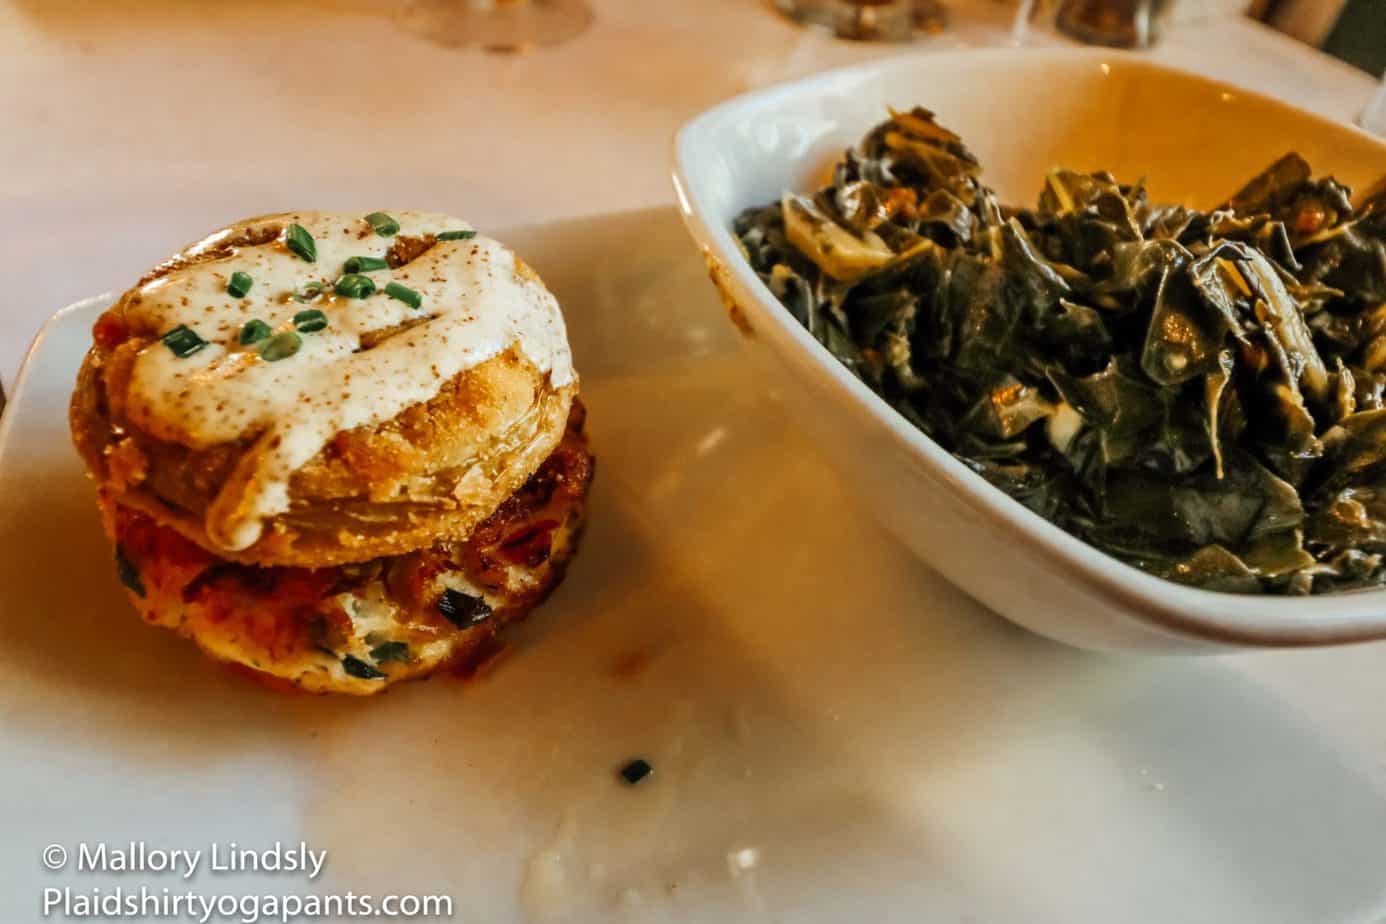 The Olde Pink house lunch size of fried green tomatoes, crab cakes, and collard greens.